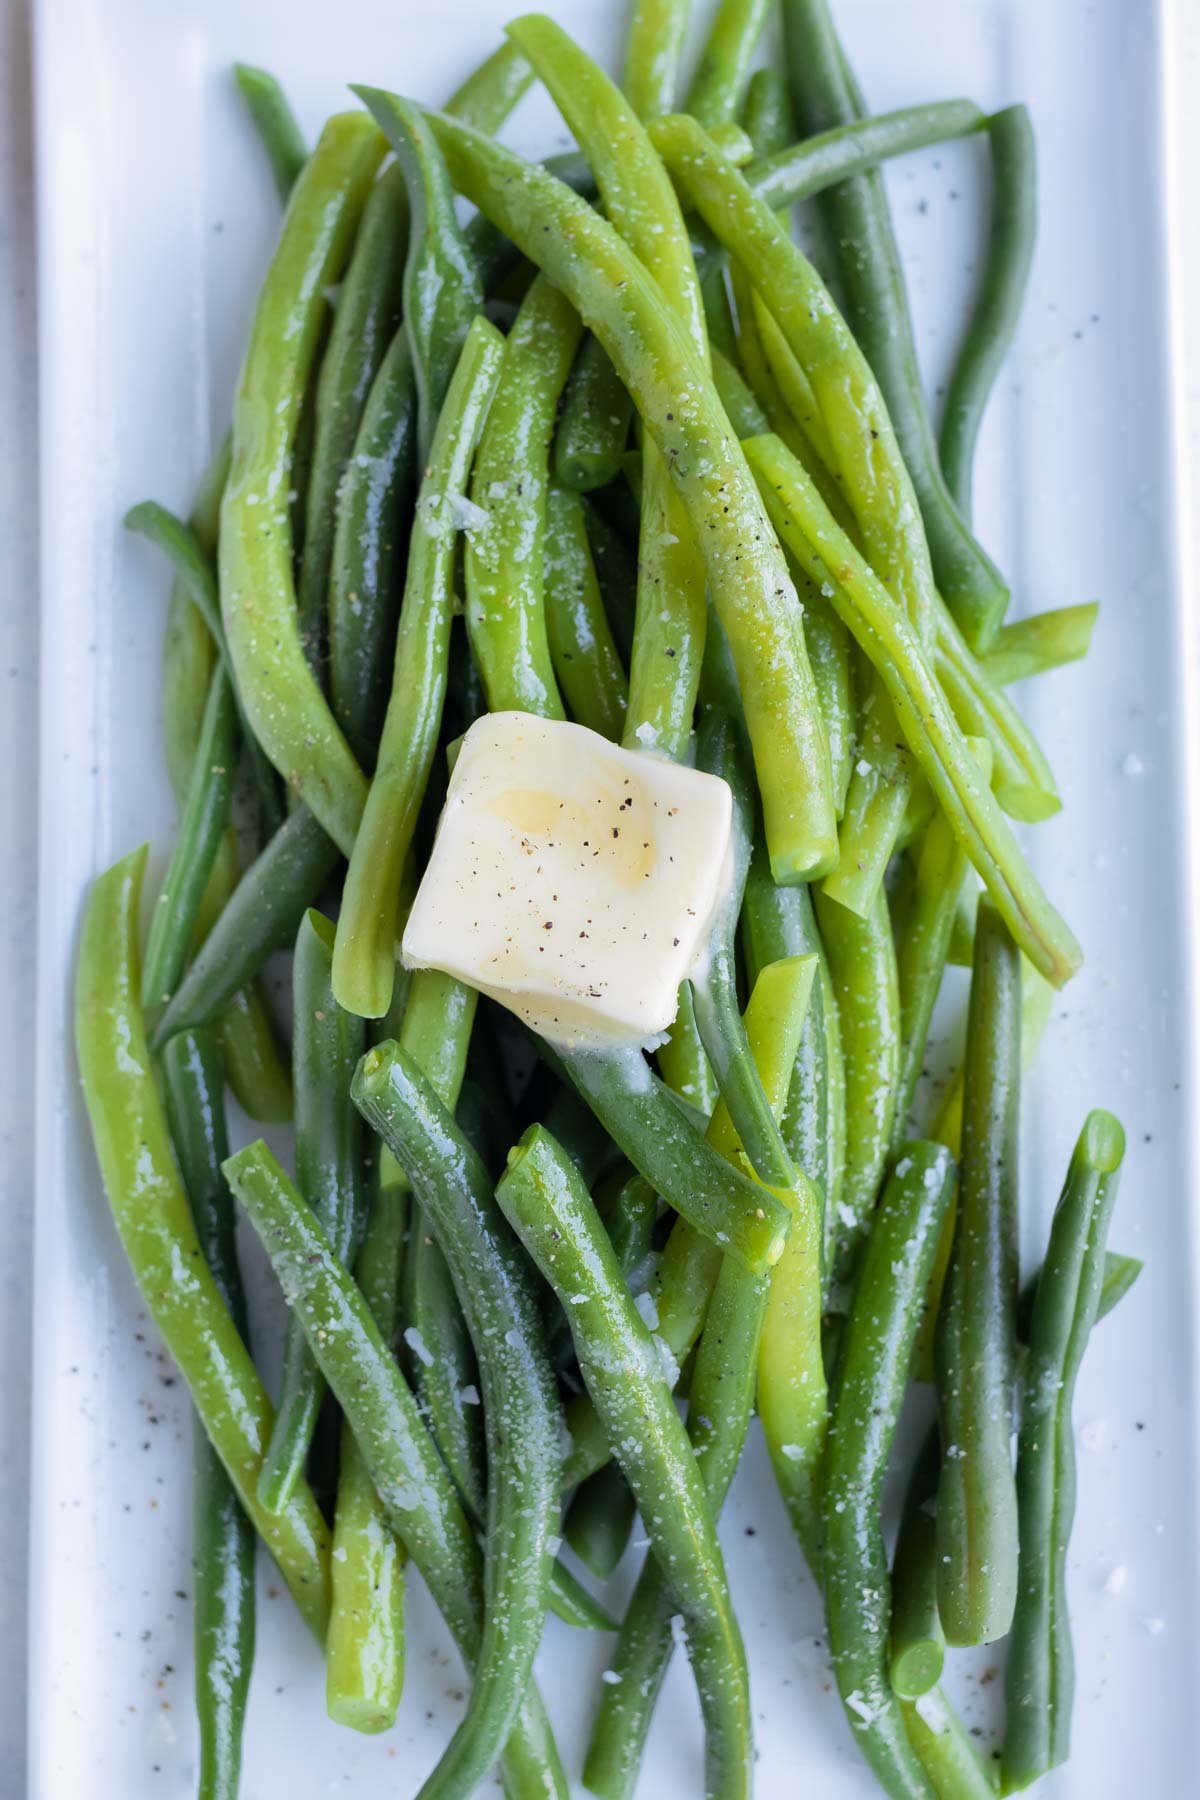 Butter is placed on top of the blanched green beans.